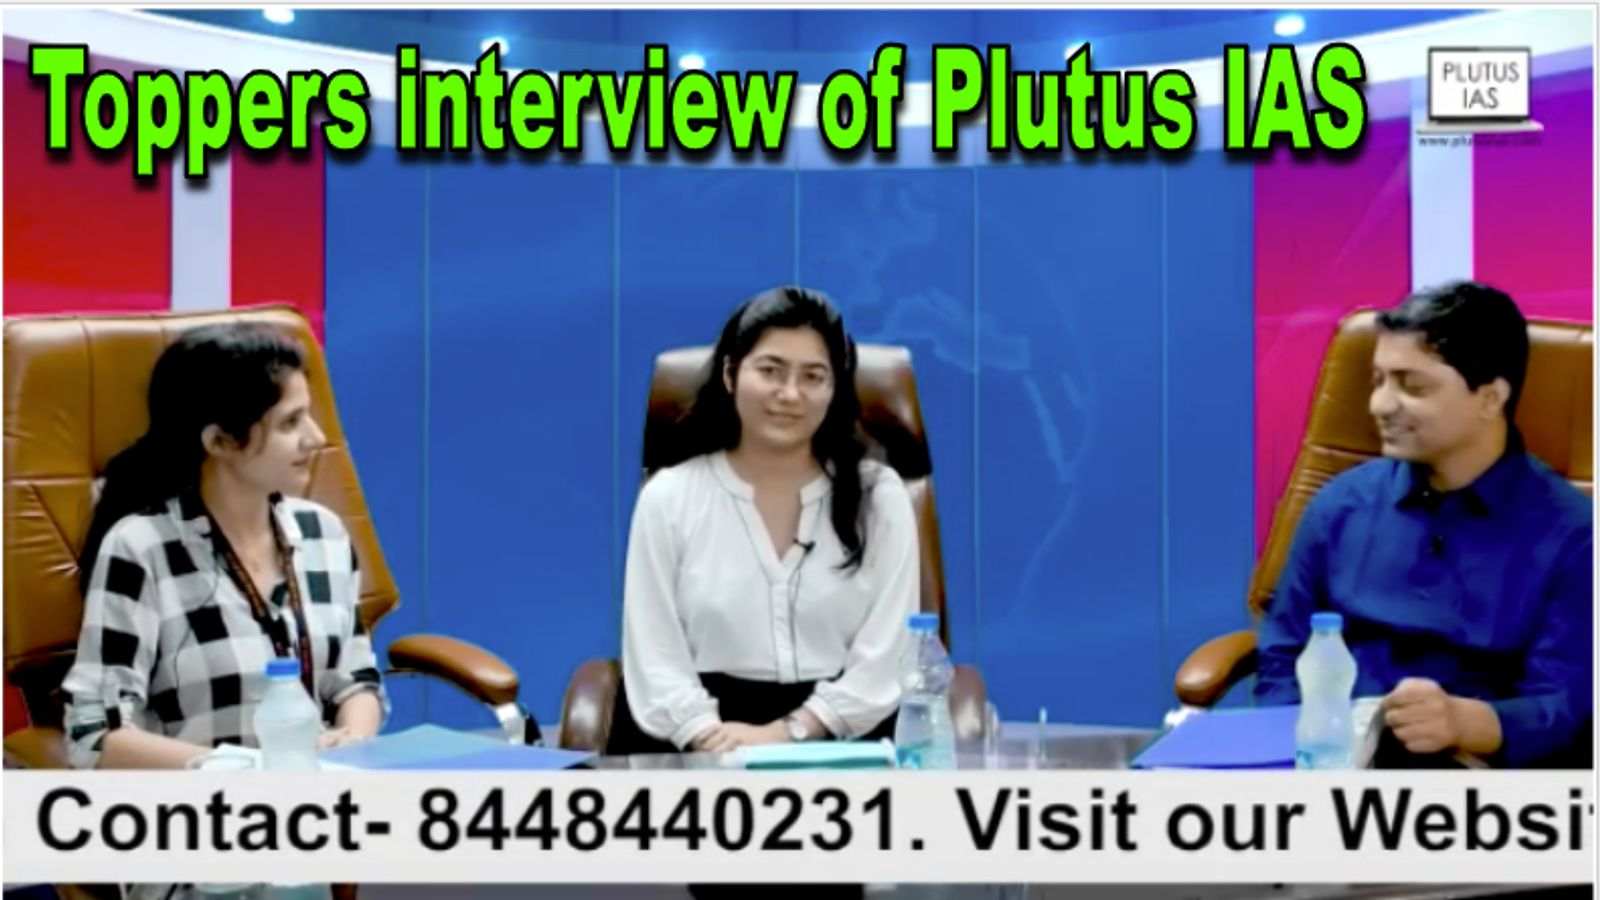 Toppers Interview of Plutus IAS